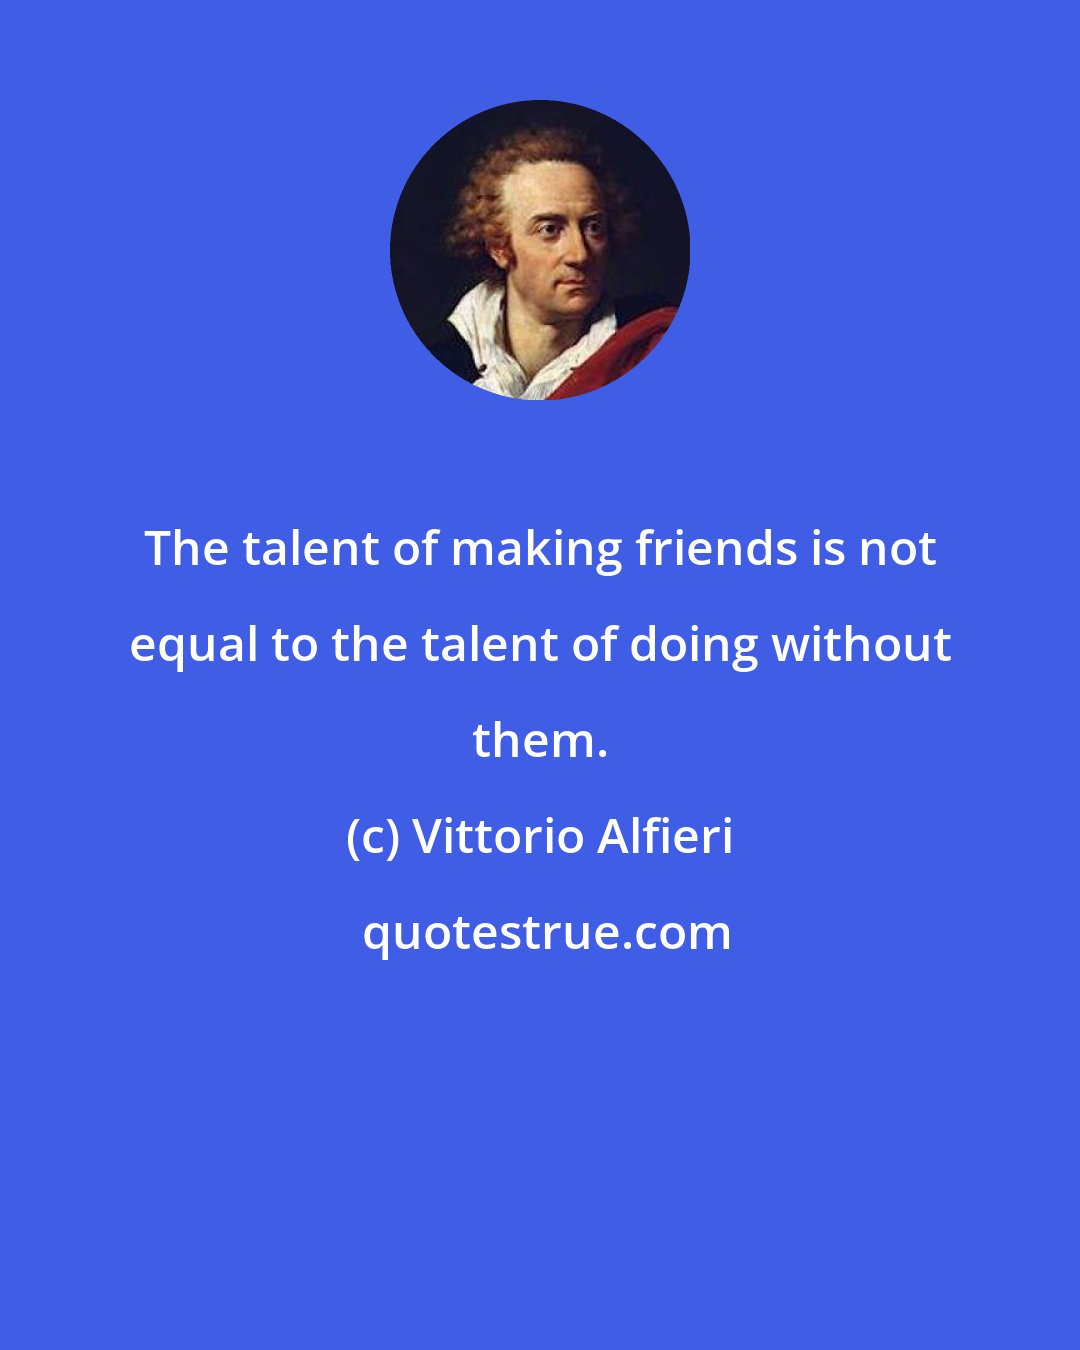 Vittorio Alfieri: The talent of making friends is not equal to the talent of doing without them.